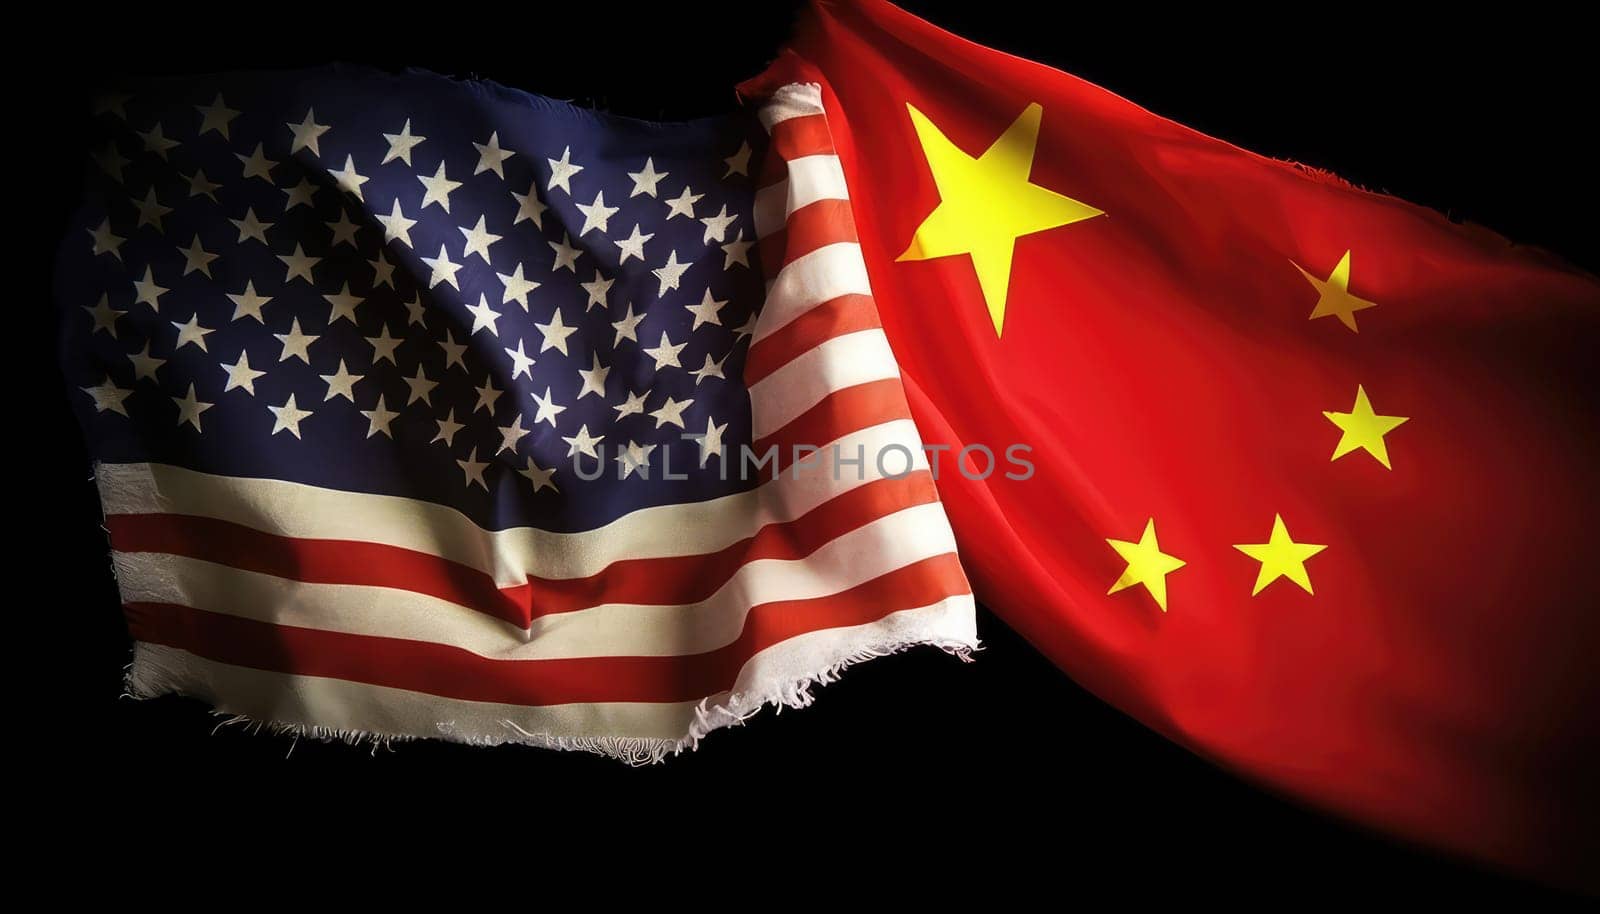 Dynamic Illustration of Torn Flags of China and USA, Symbolizing Diplomatic Tension.